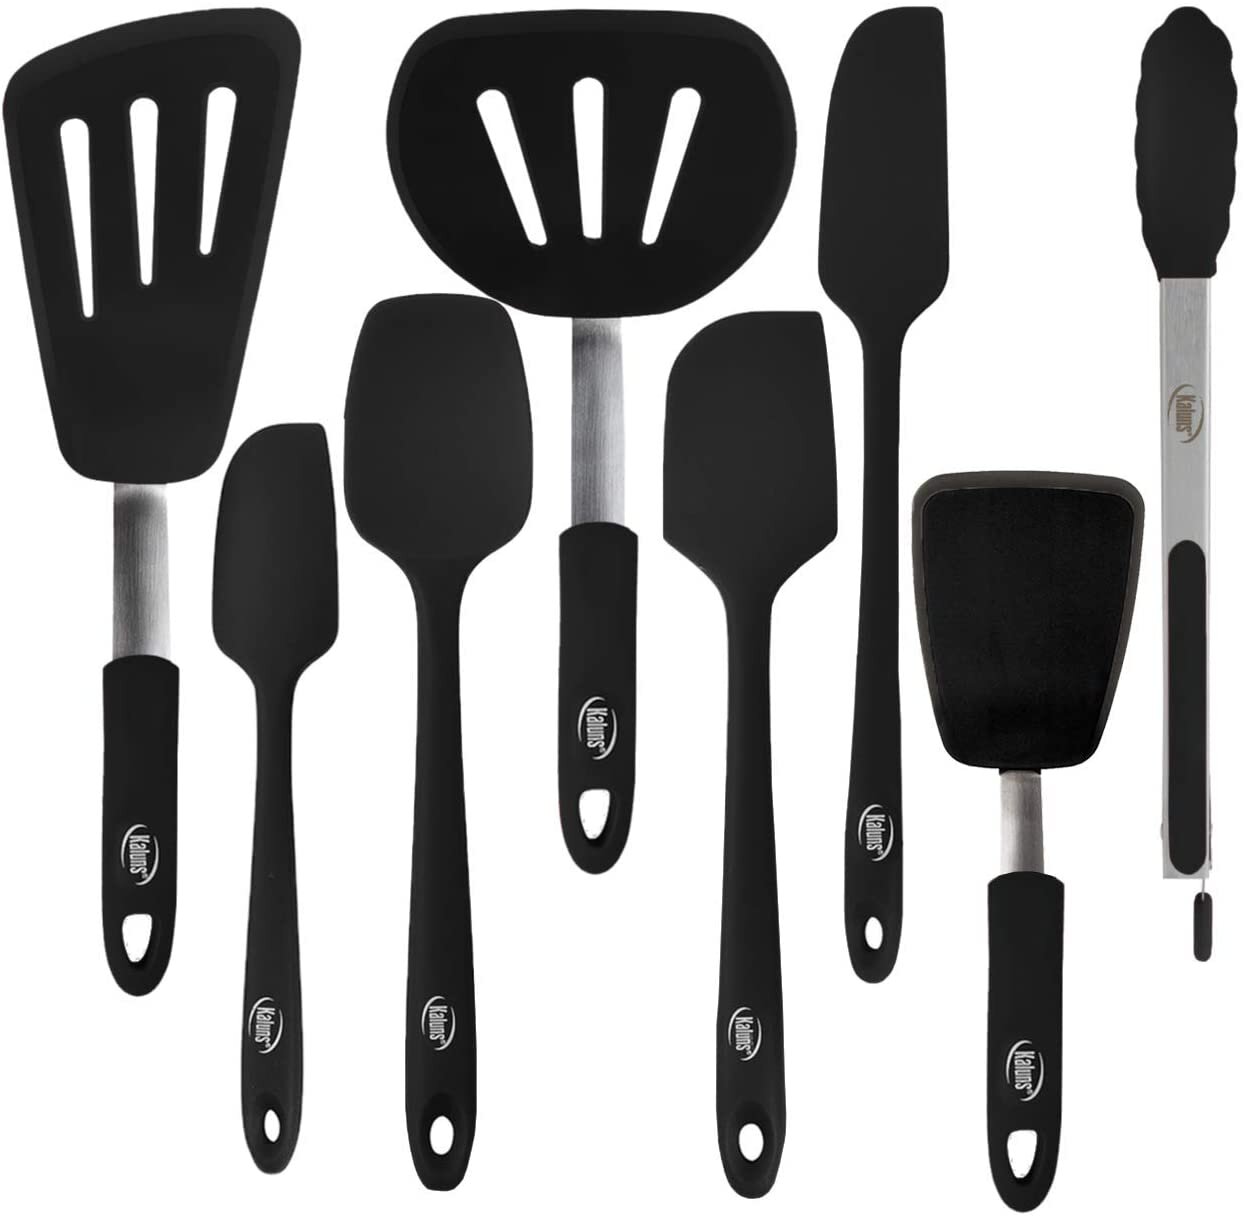 Baking and Mixing Strong Stainless steel core design Kaluns 4-Piece Spatula set Red Includes 3 Silicone Spatulas and One 9 Tong 600F Heat resistant Non-stick Rubber Kitchen Tools for Cooking 